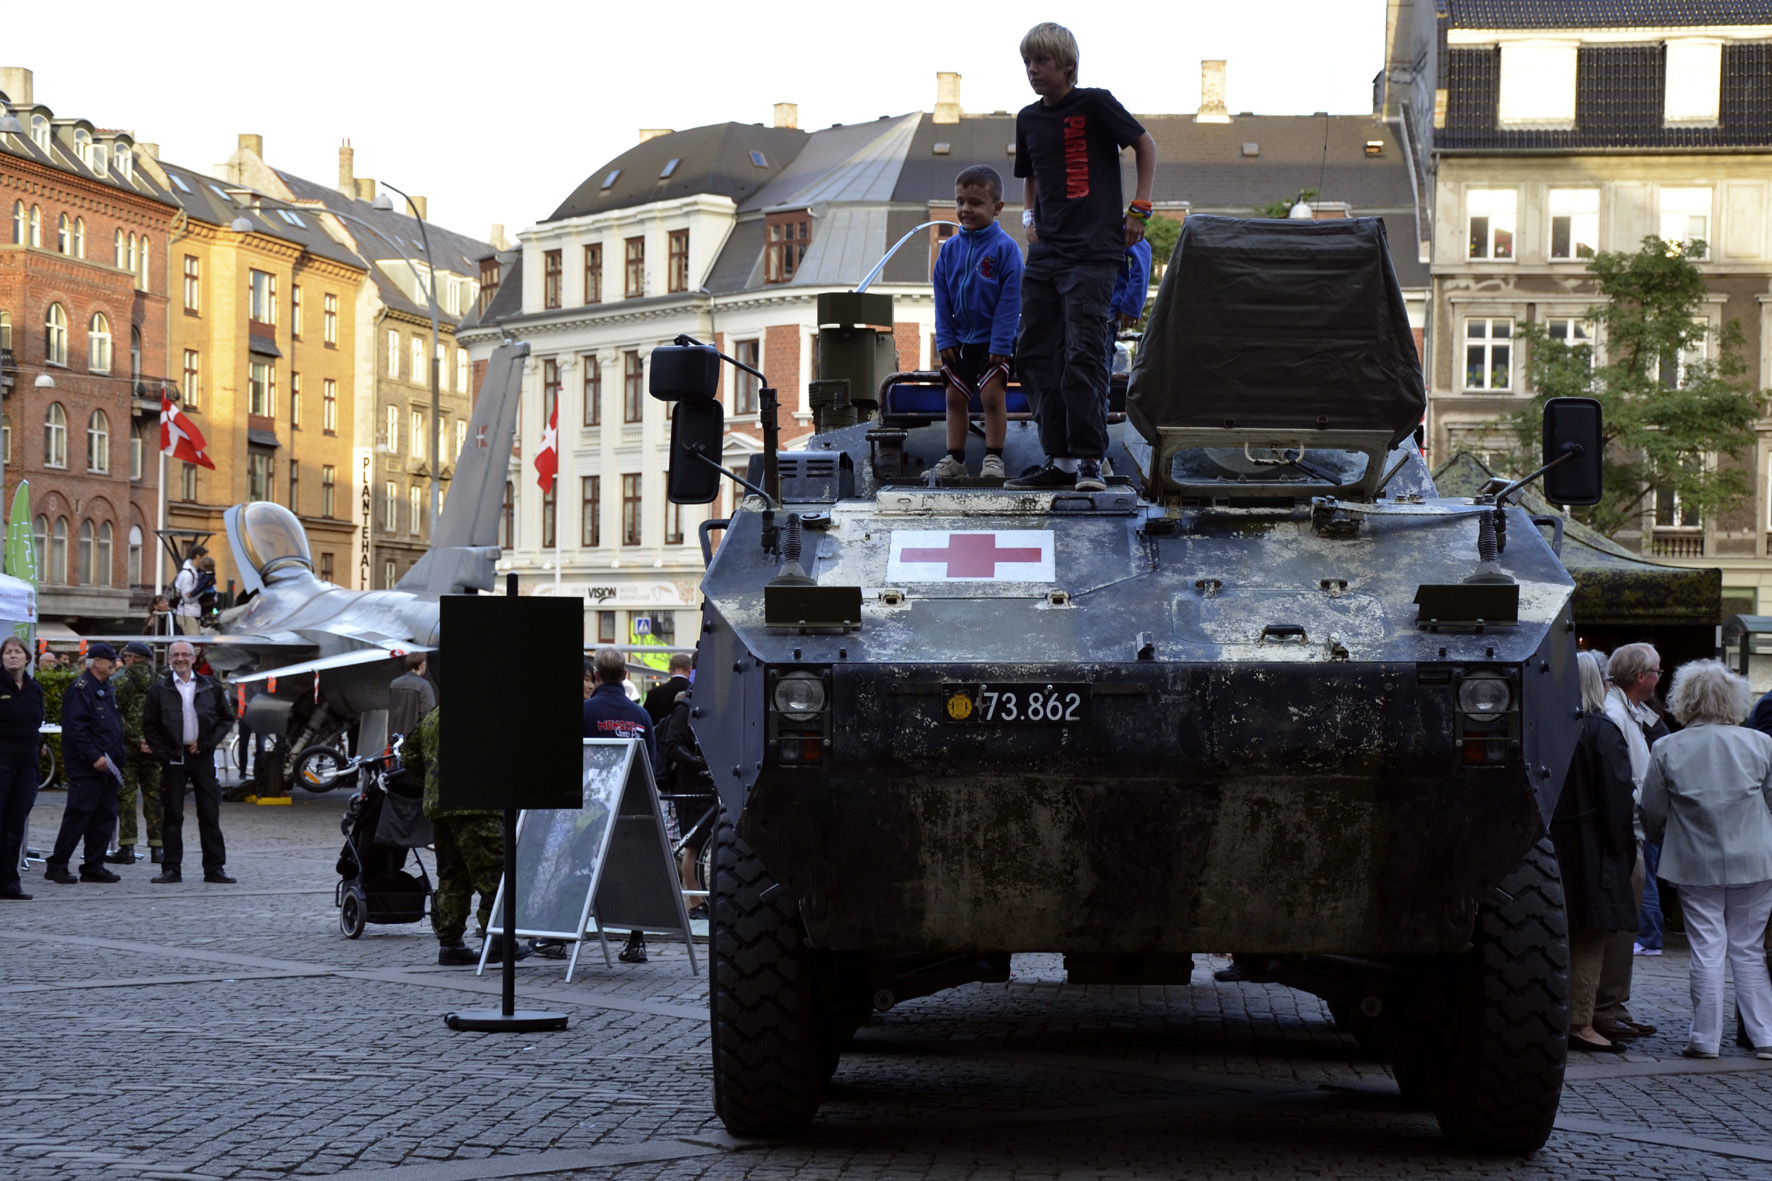 Boys on top of an armored Piranha ambulance on display at the town hall square of Frederiksberg. Photo by Thomas Randrup Pedersen